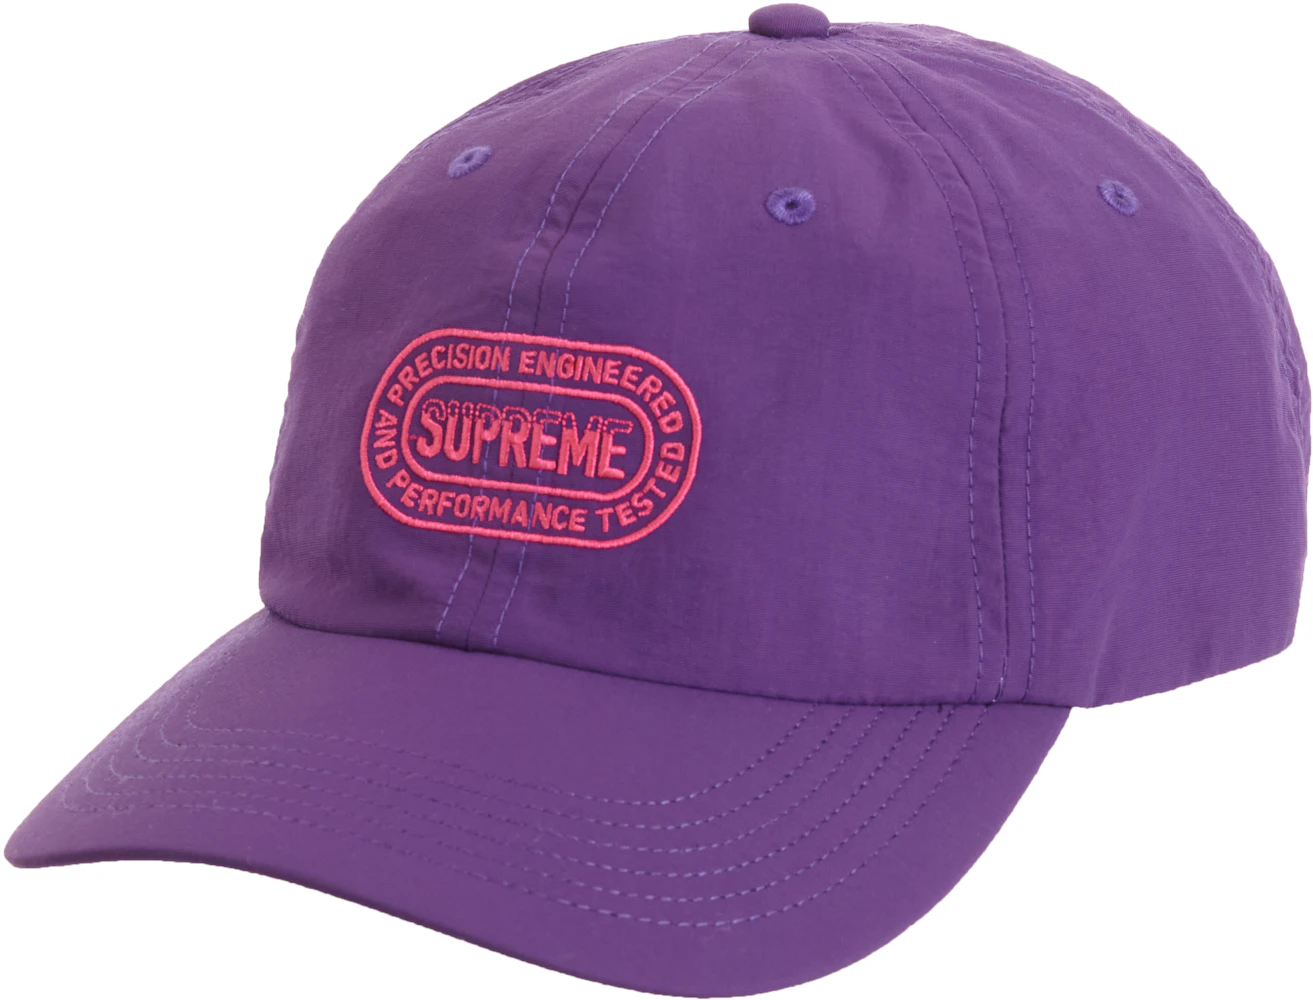 Buy a Supreme Performance Hat